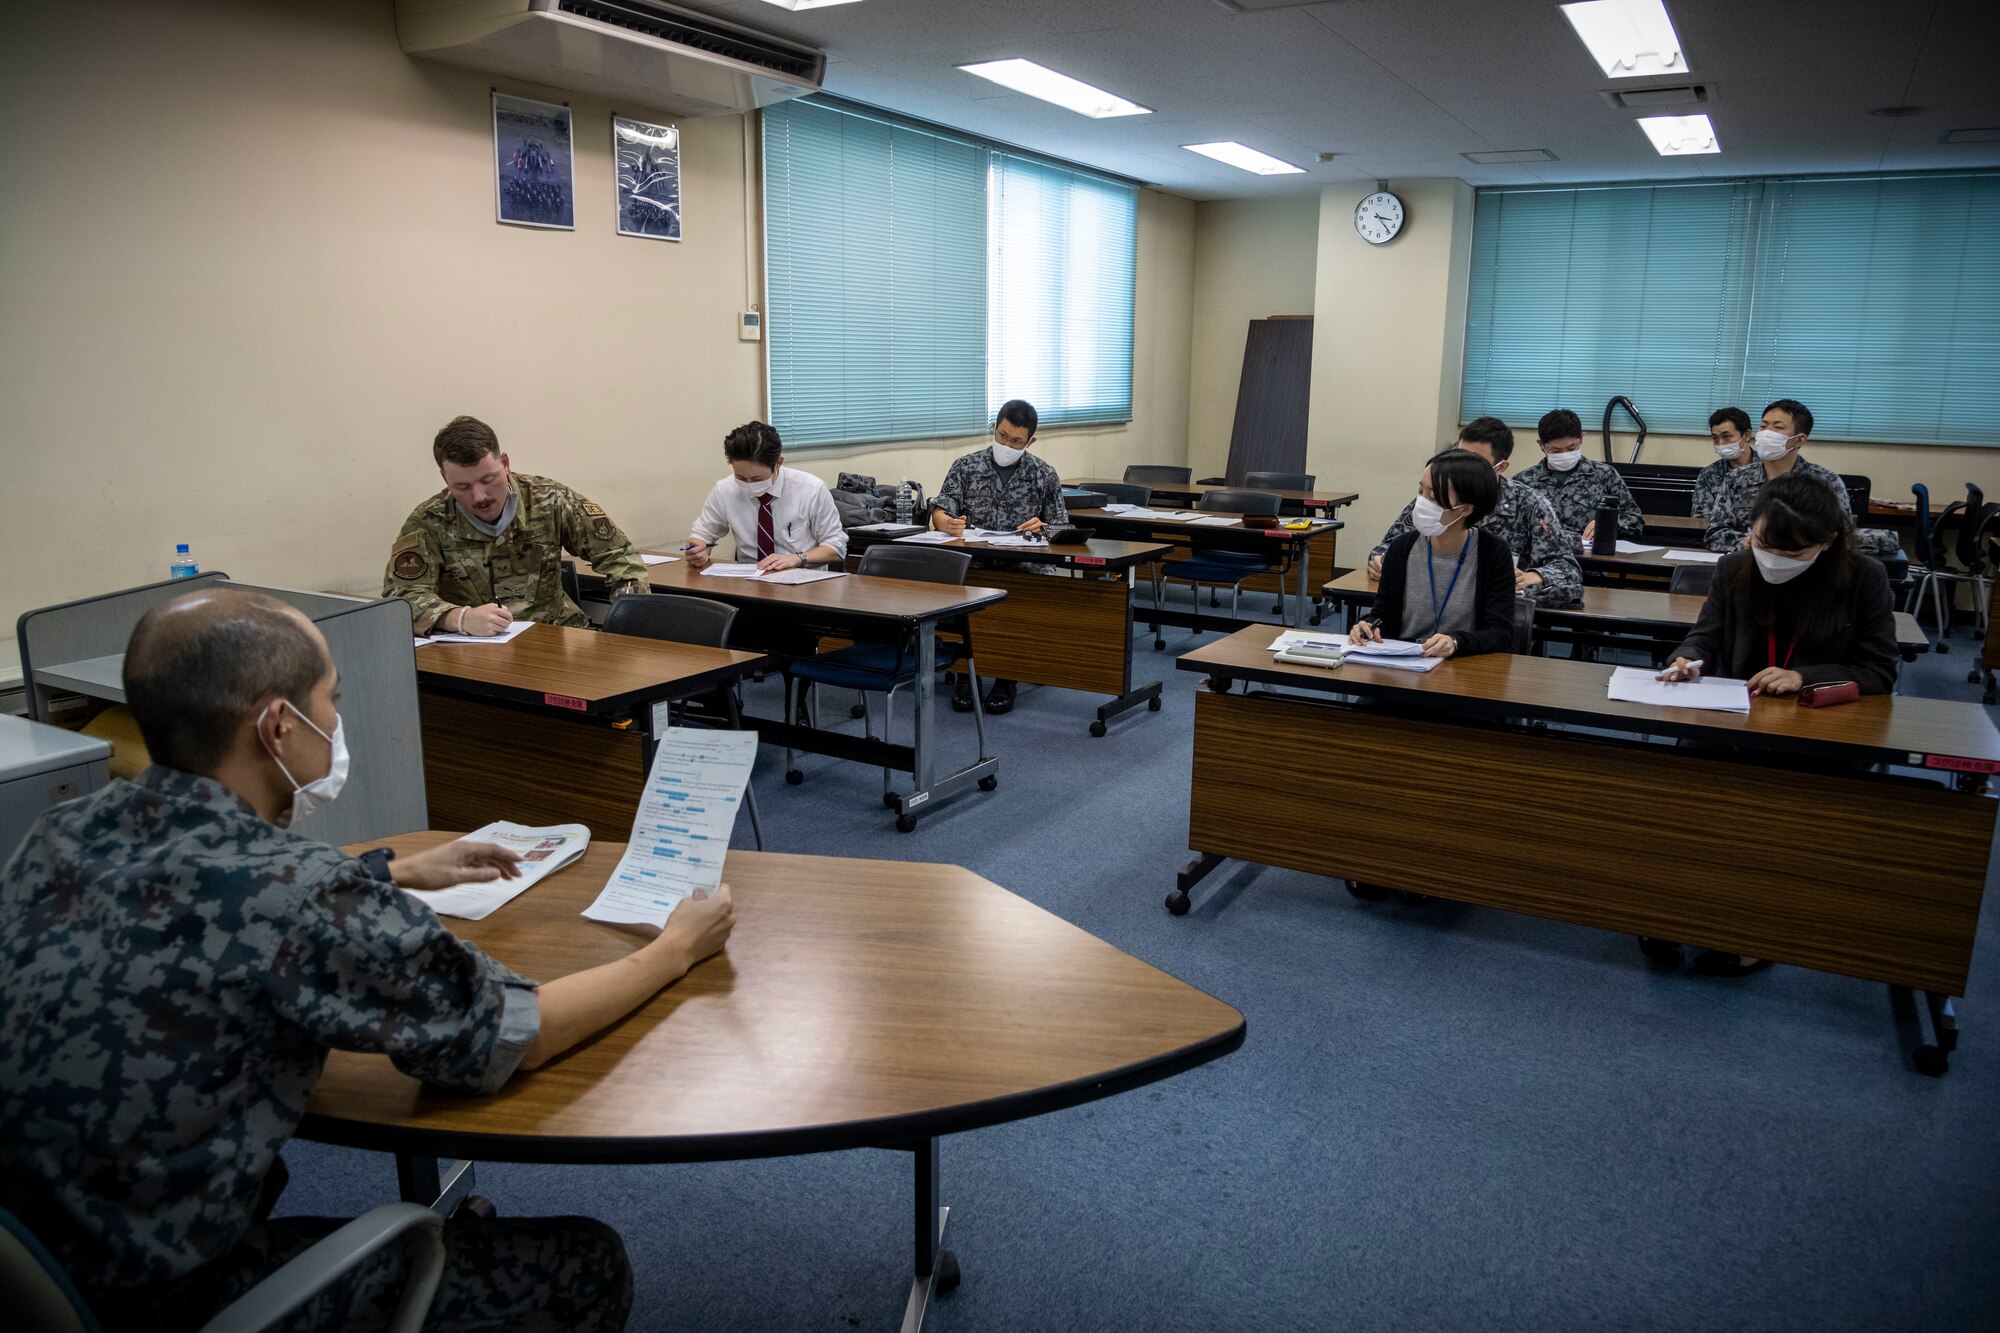 Japan Air Self-Defense Force (JASDF) airmen practice presentations for the Northern Air Defense Force (NADF) English Competition at Misawa Air Base, Japan, Oct. 14, 2021. The NADF English Competition is a tournament open for all the uniformed JASDF personnel to compete in their English proficiency. (U.S. Air Force photo by Senior Airman China M. Shock)